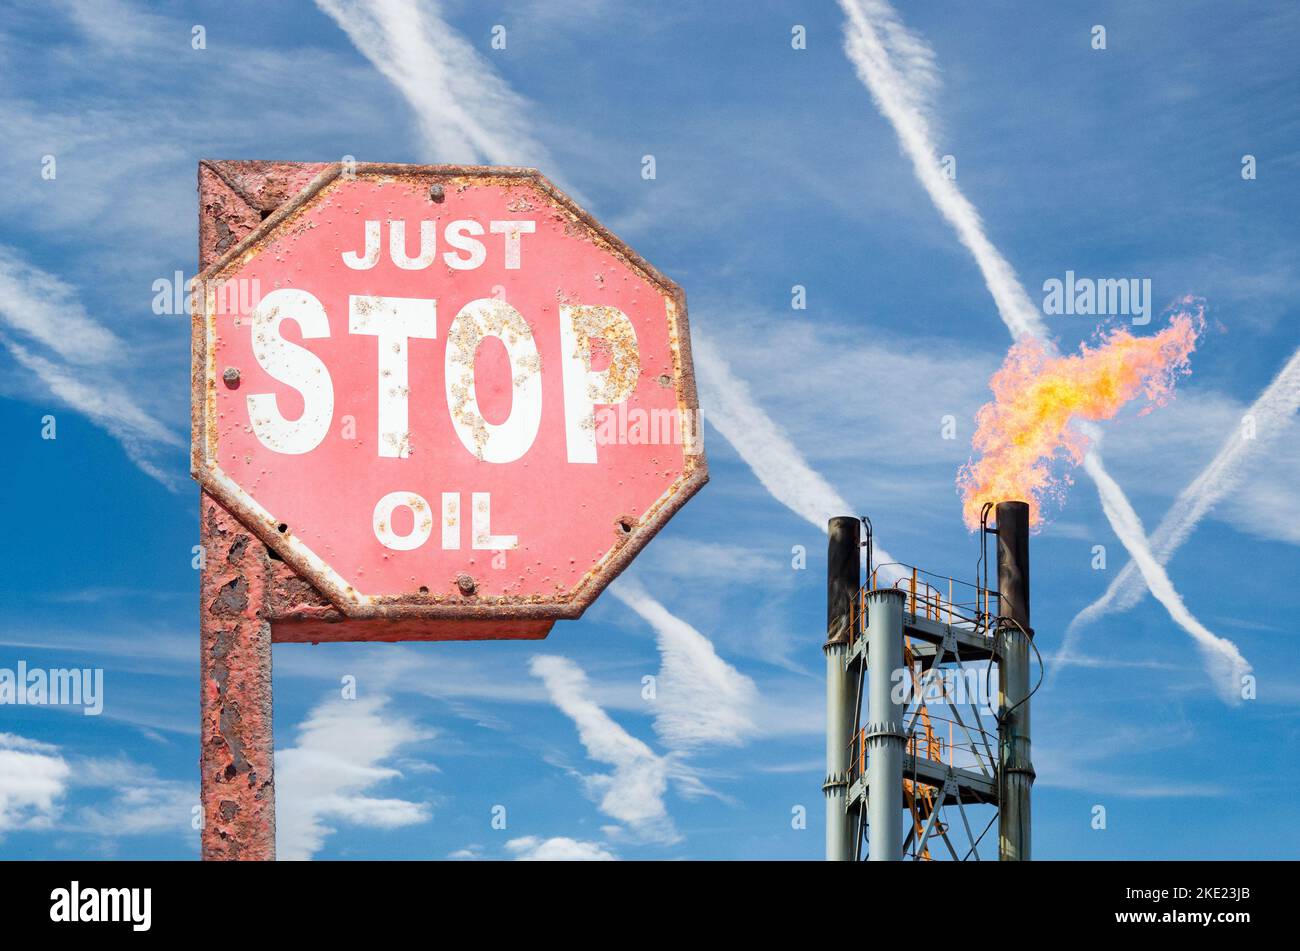 Just stop oil concept image. Refinery gas flare stack with aircraft contrails in sky. Global warming, climate change, climate crisis, net zero... Stock Photo